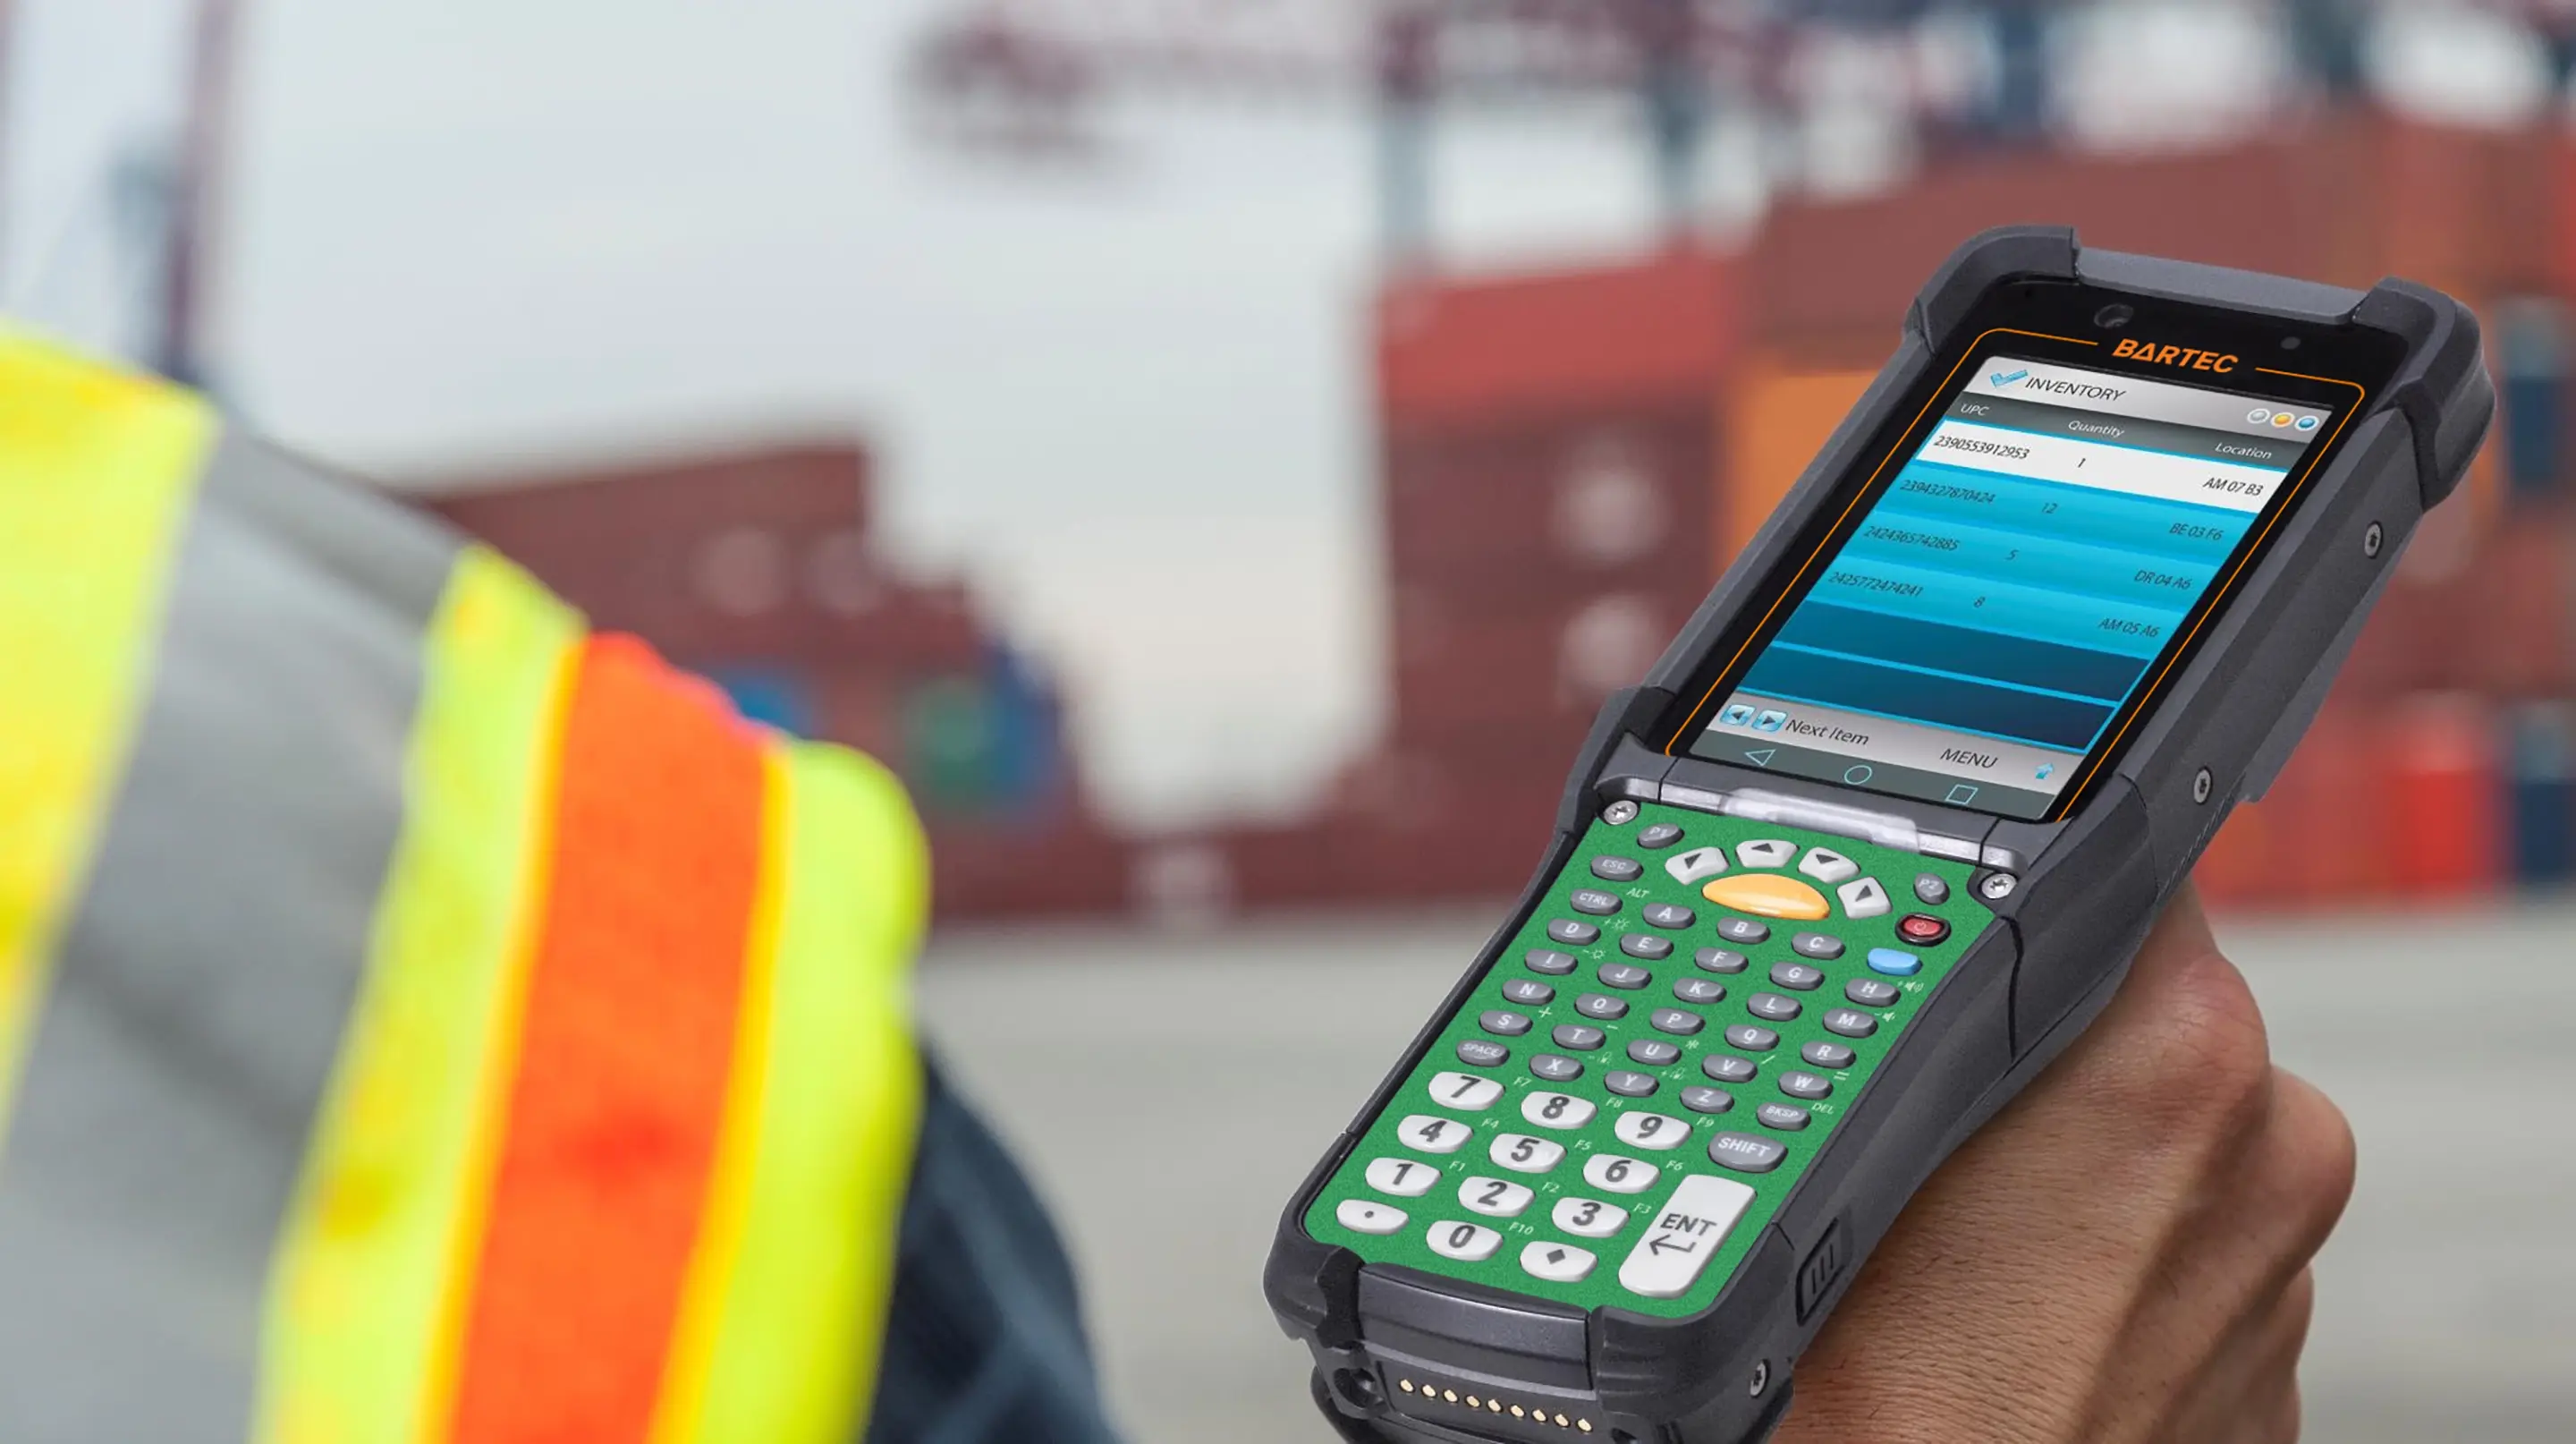 News New Mobile Computer MC 93ex-NI for Use in Hazardous Areas